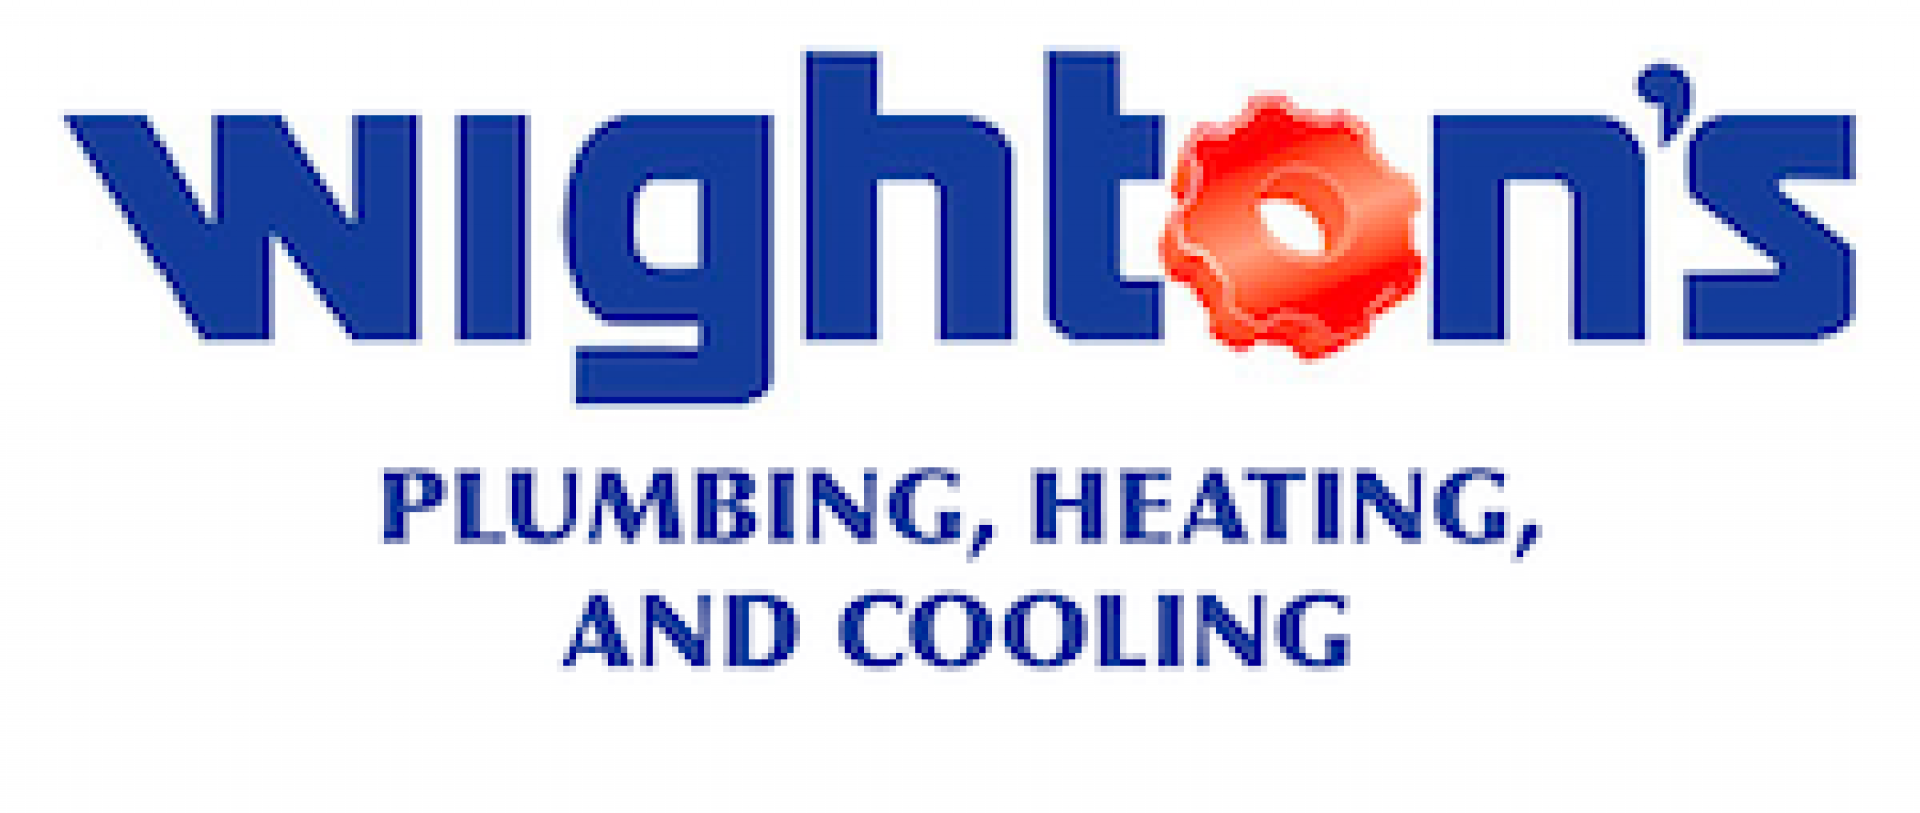 Wighton's Plumbing, Heating, and Air Conditioning company logo